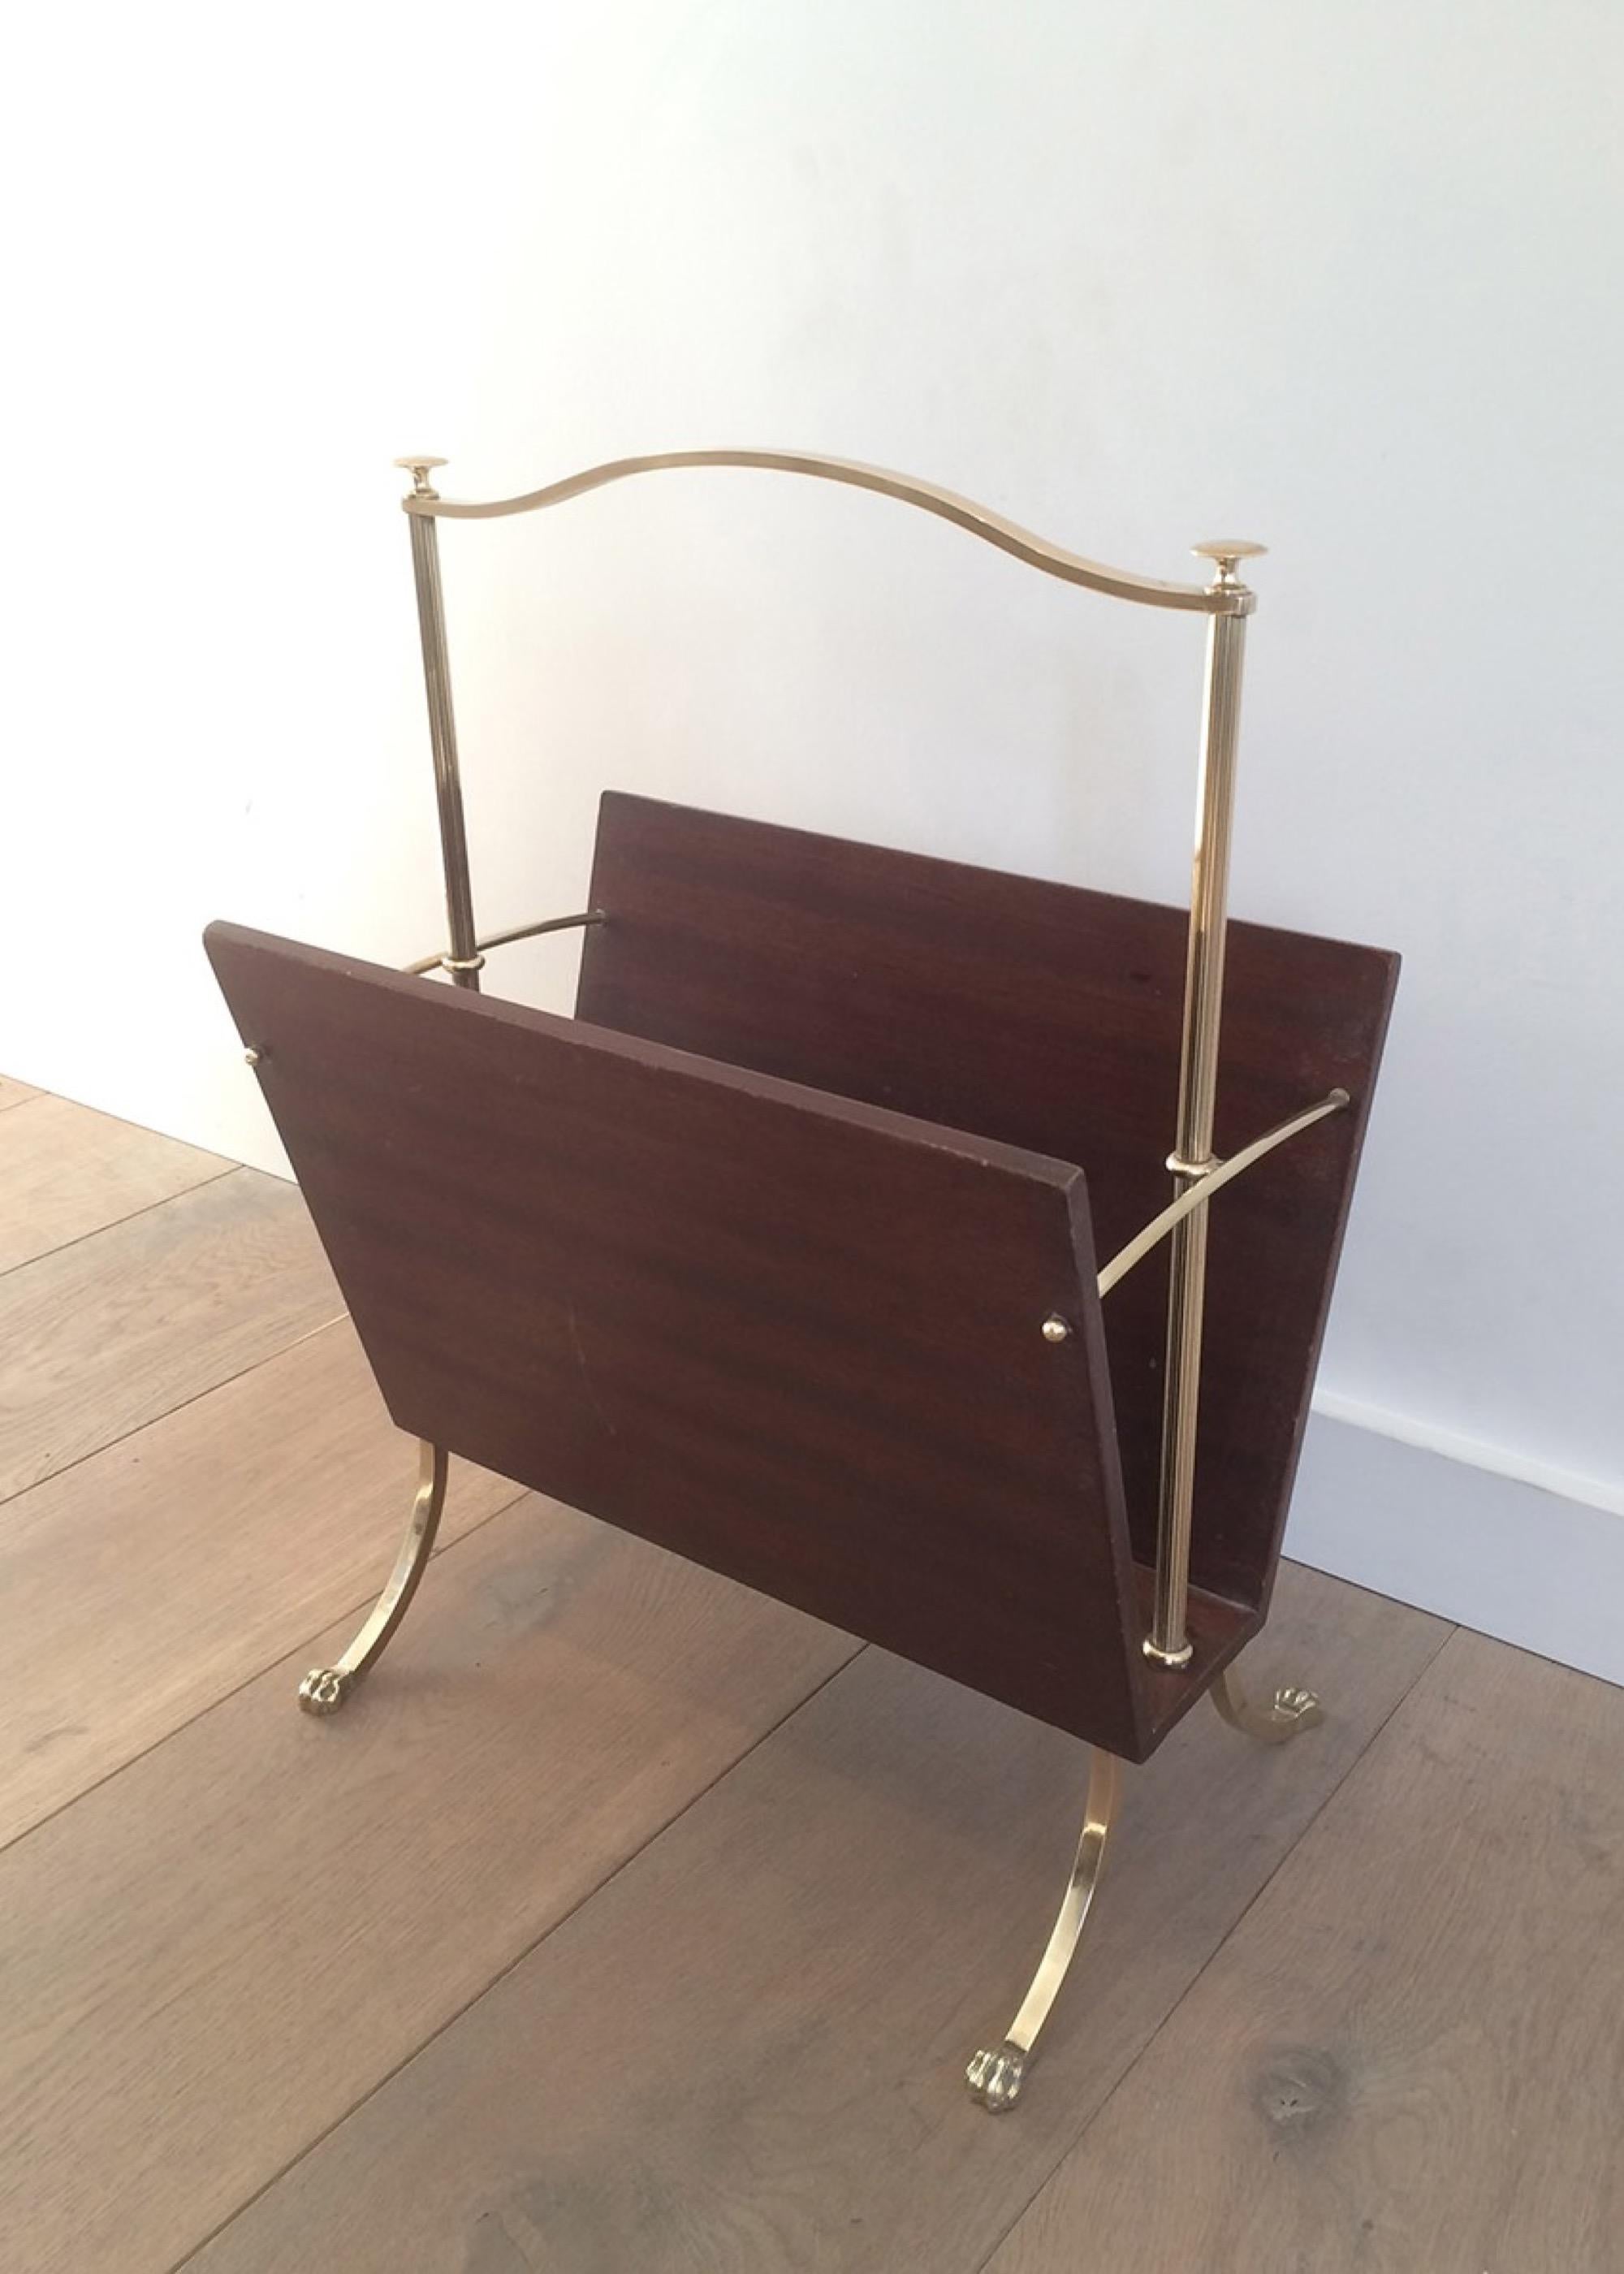 This nice magazine rack is made of wood and brass with claw feet. This is a French work by famous designer Maison Jansen, circa 1940.